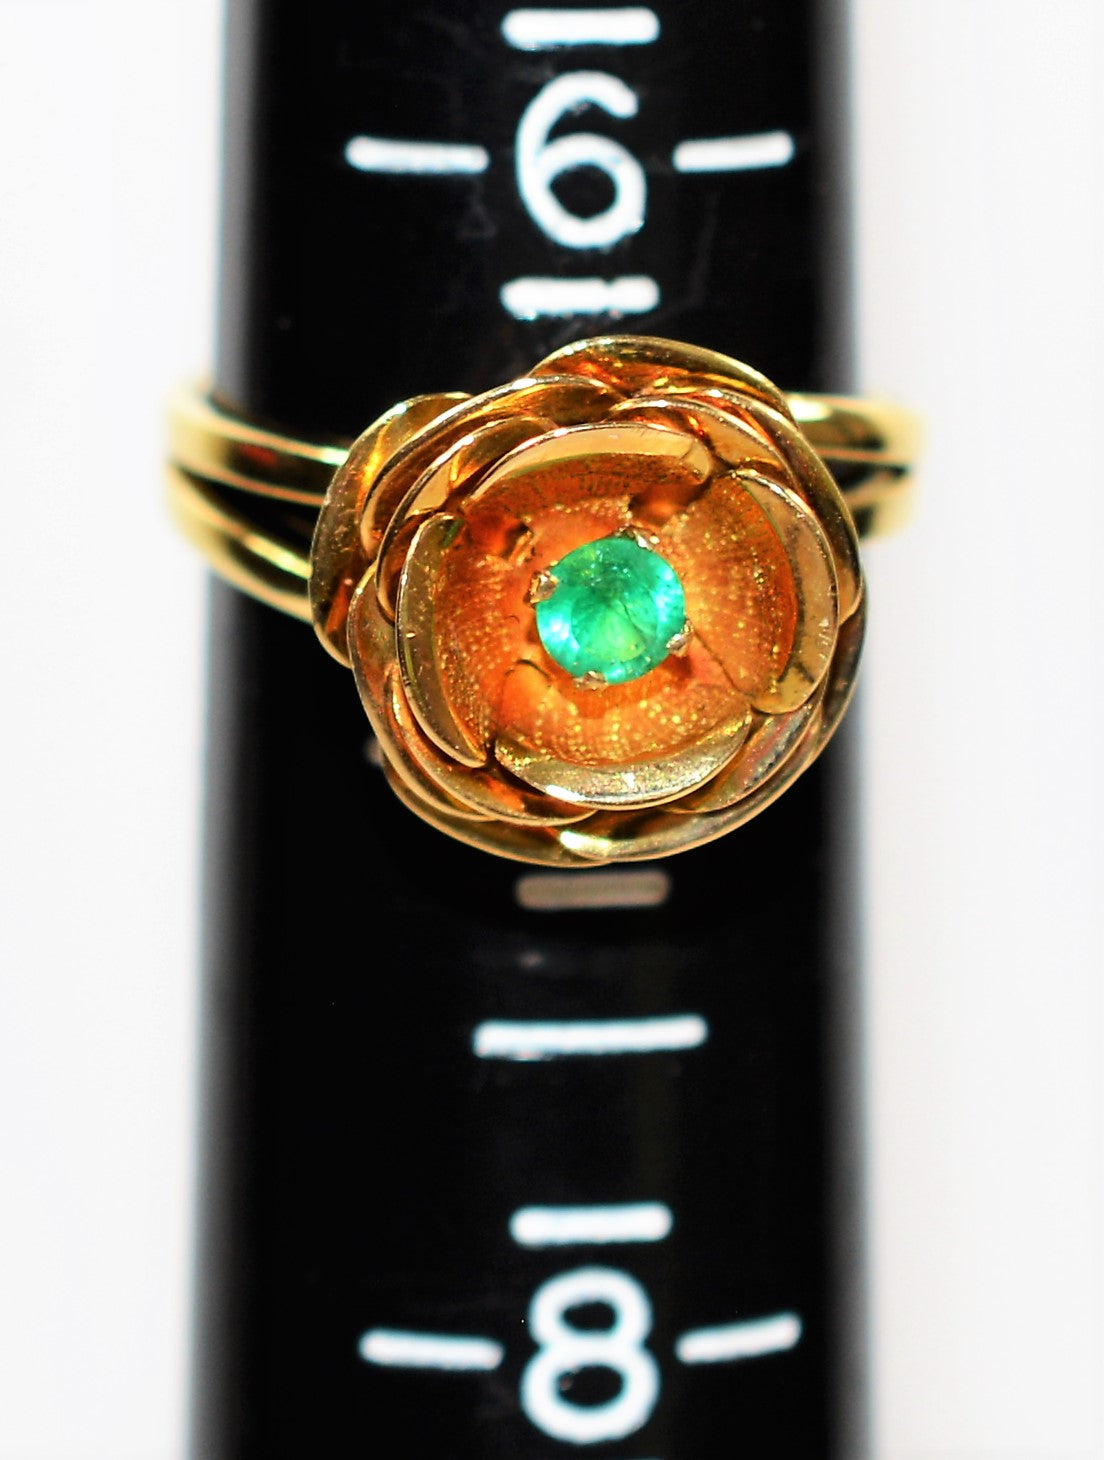 Natural Colombian Emerald Ring 18K Solid Gold .25ct Flower Ring Solitaire Ring Statement Ring Women's Ring May Birthstone Ring Vintage Ring